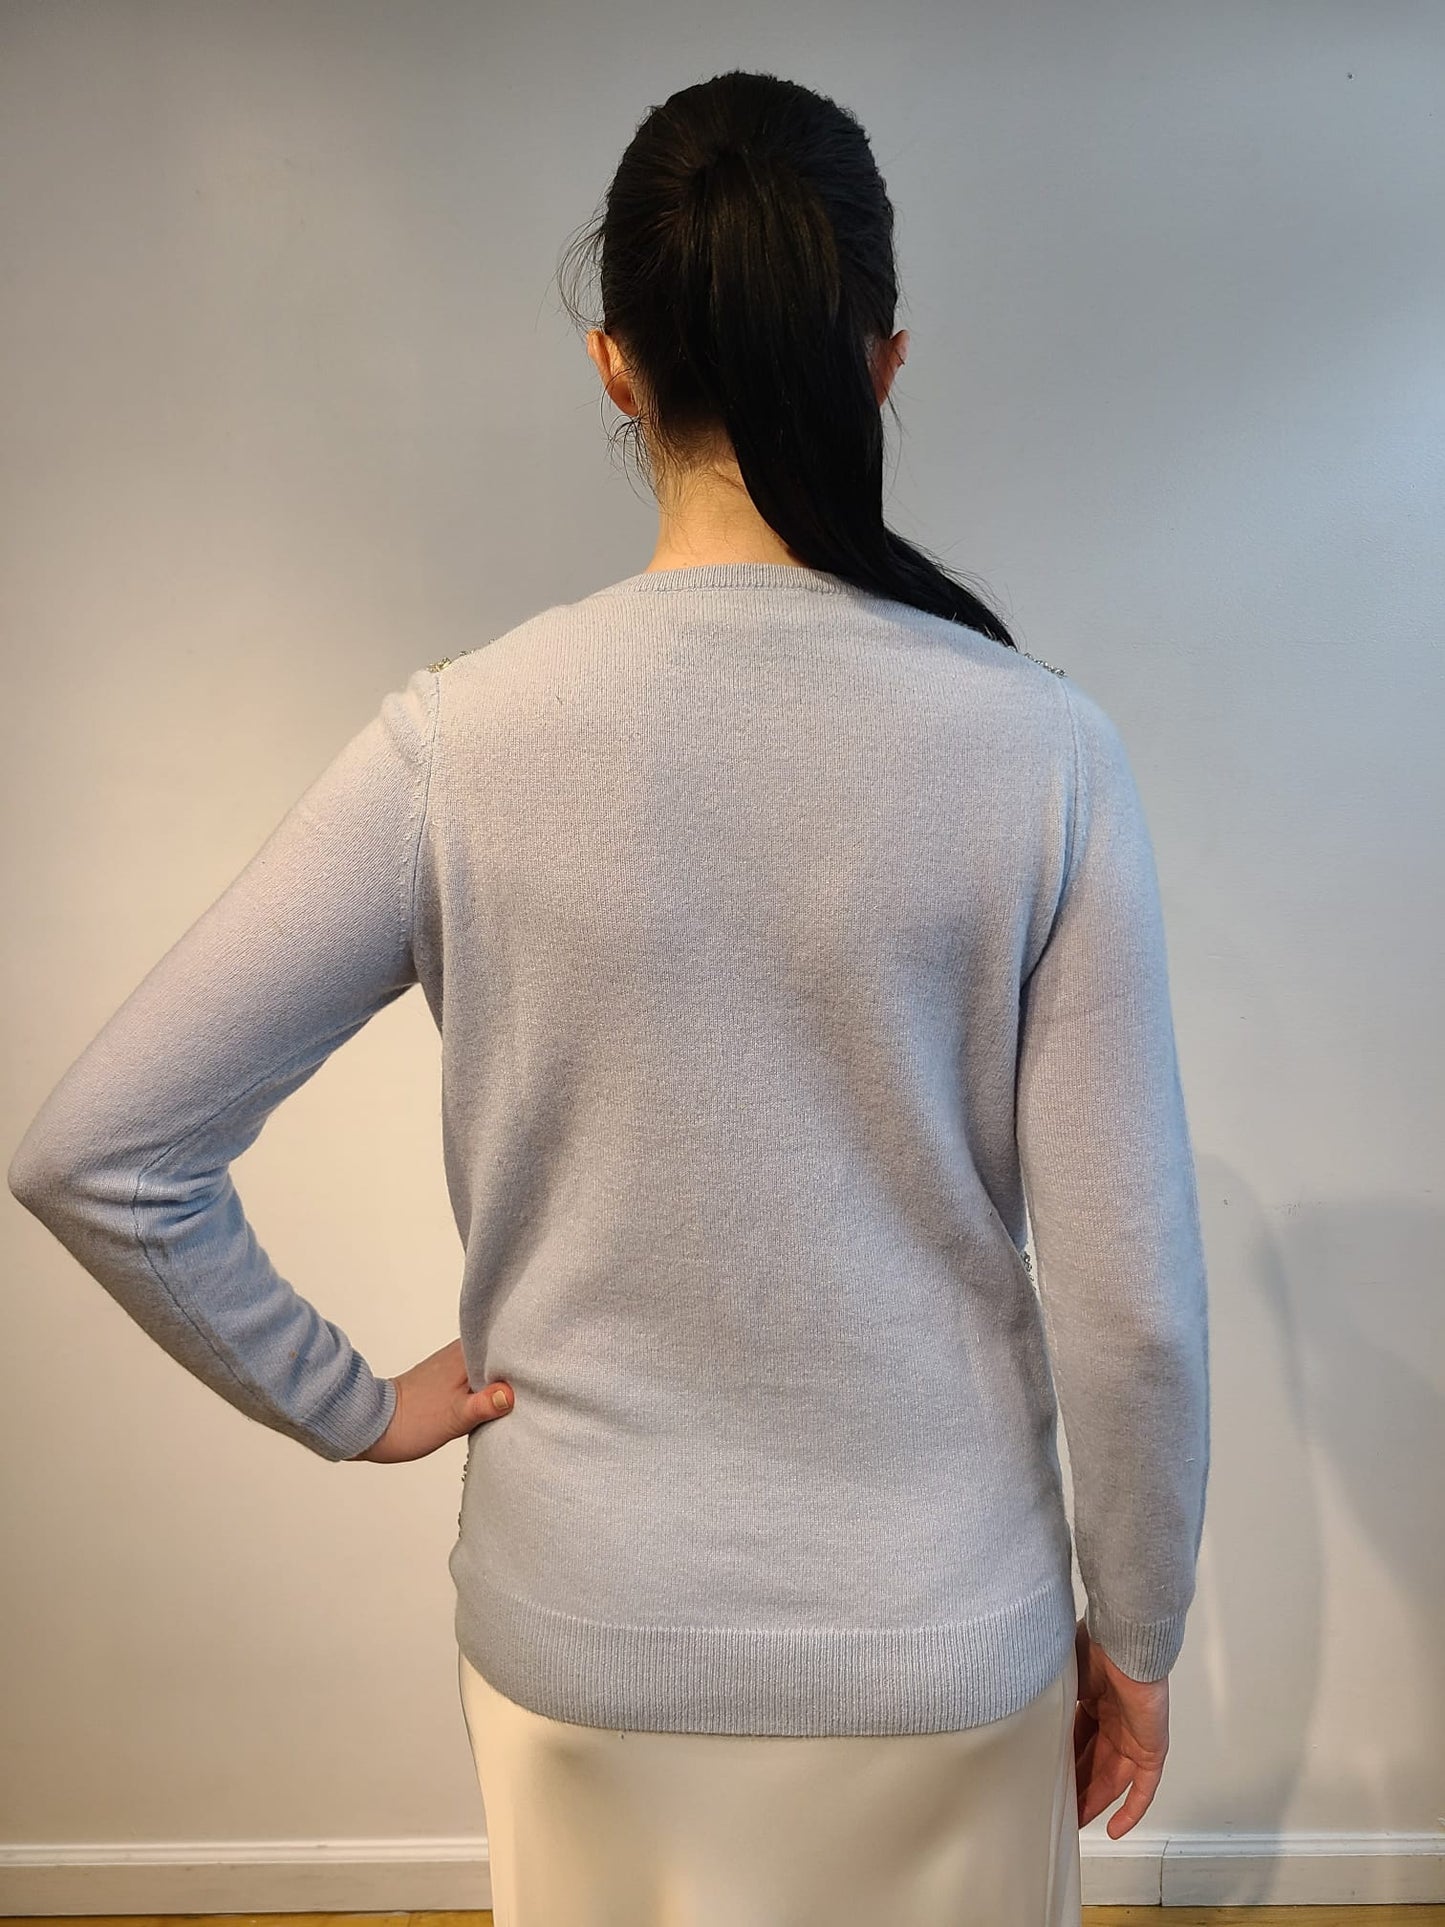 BABY BLUE CASHMERE V NECK LONG SLEEVE WITH FRONT EMBELLISHED FUTURISTIC SILVER DISCS & CRYSTAL BEADS ON DOVE GRAY TULLE (SIZE M)